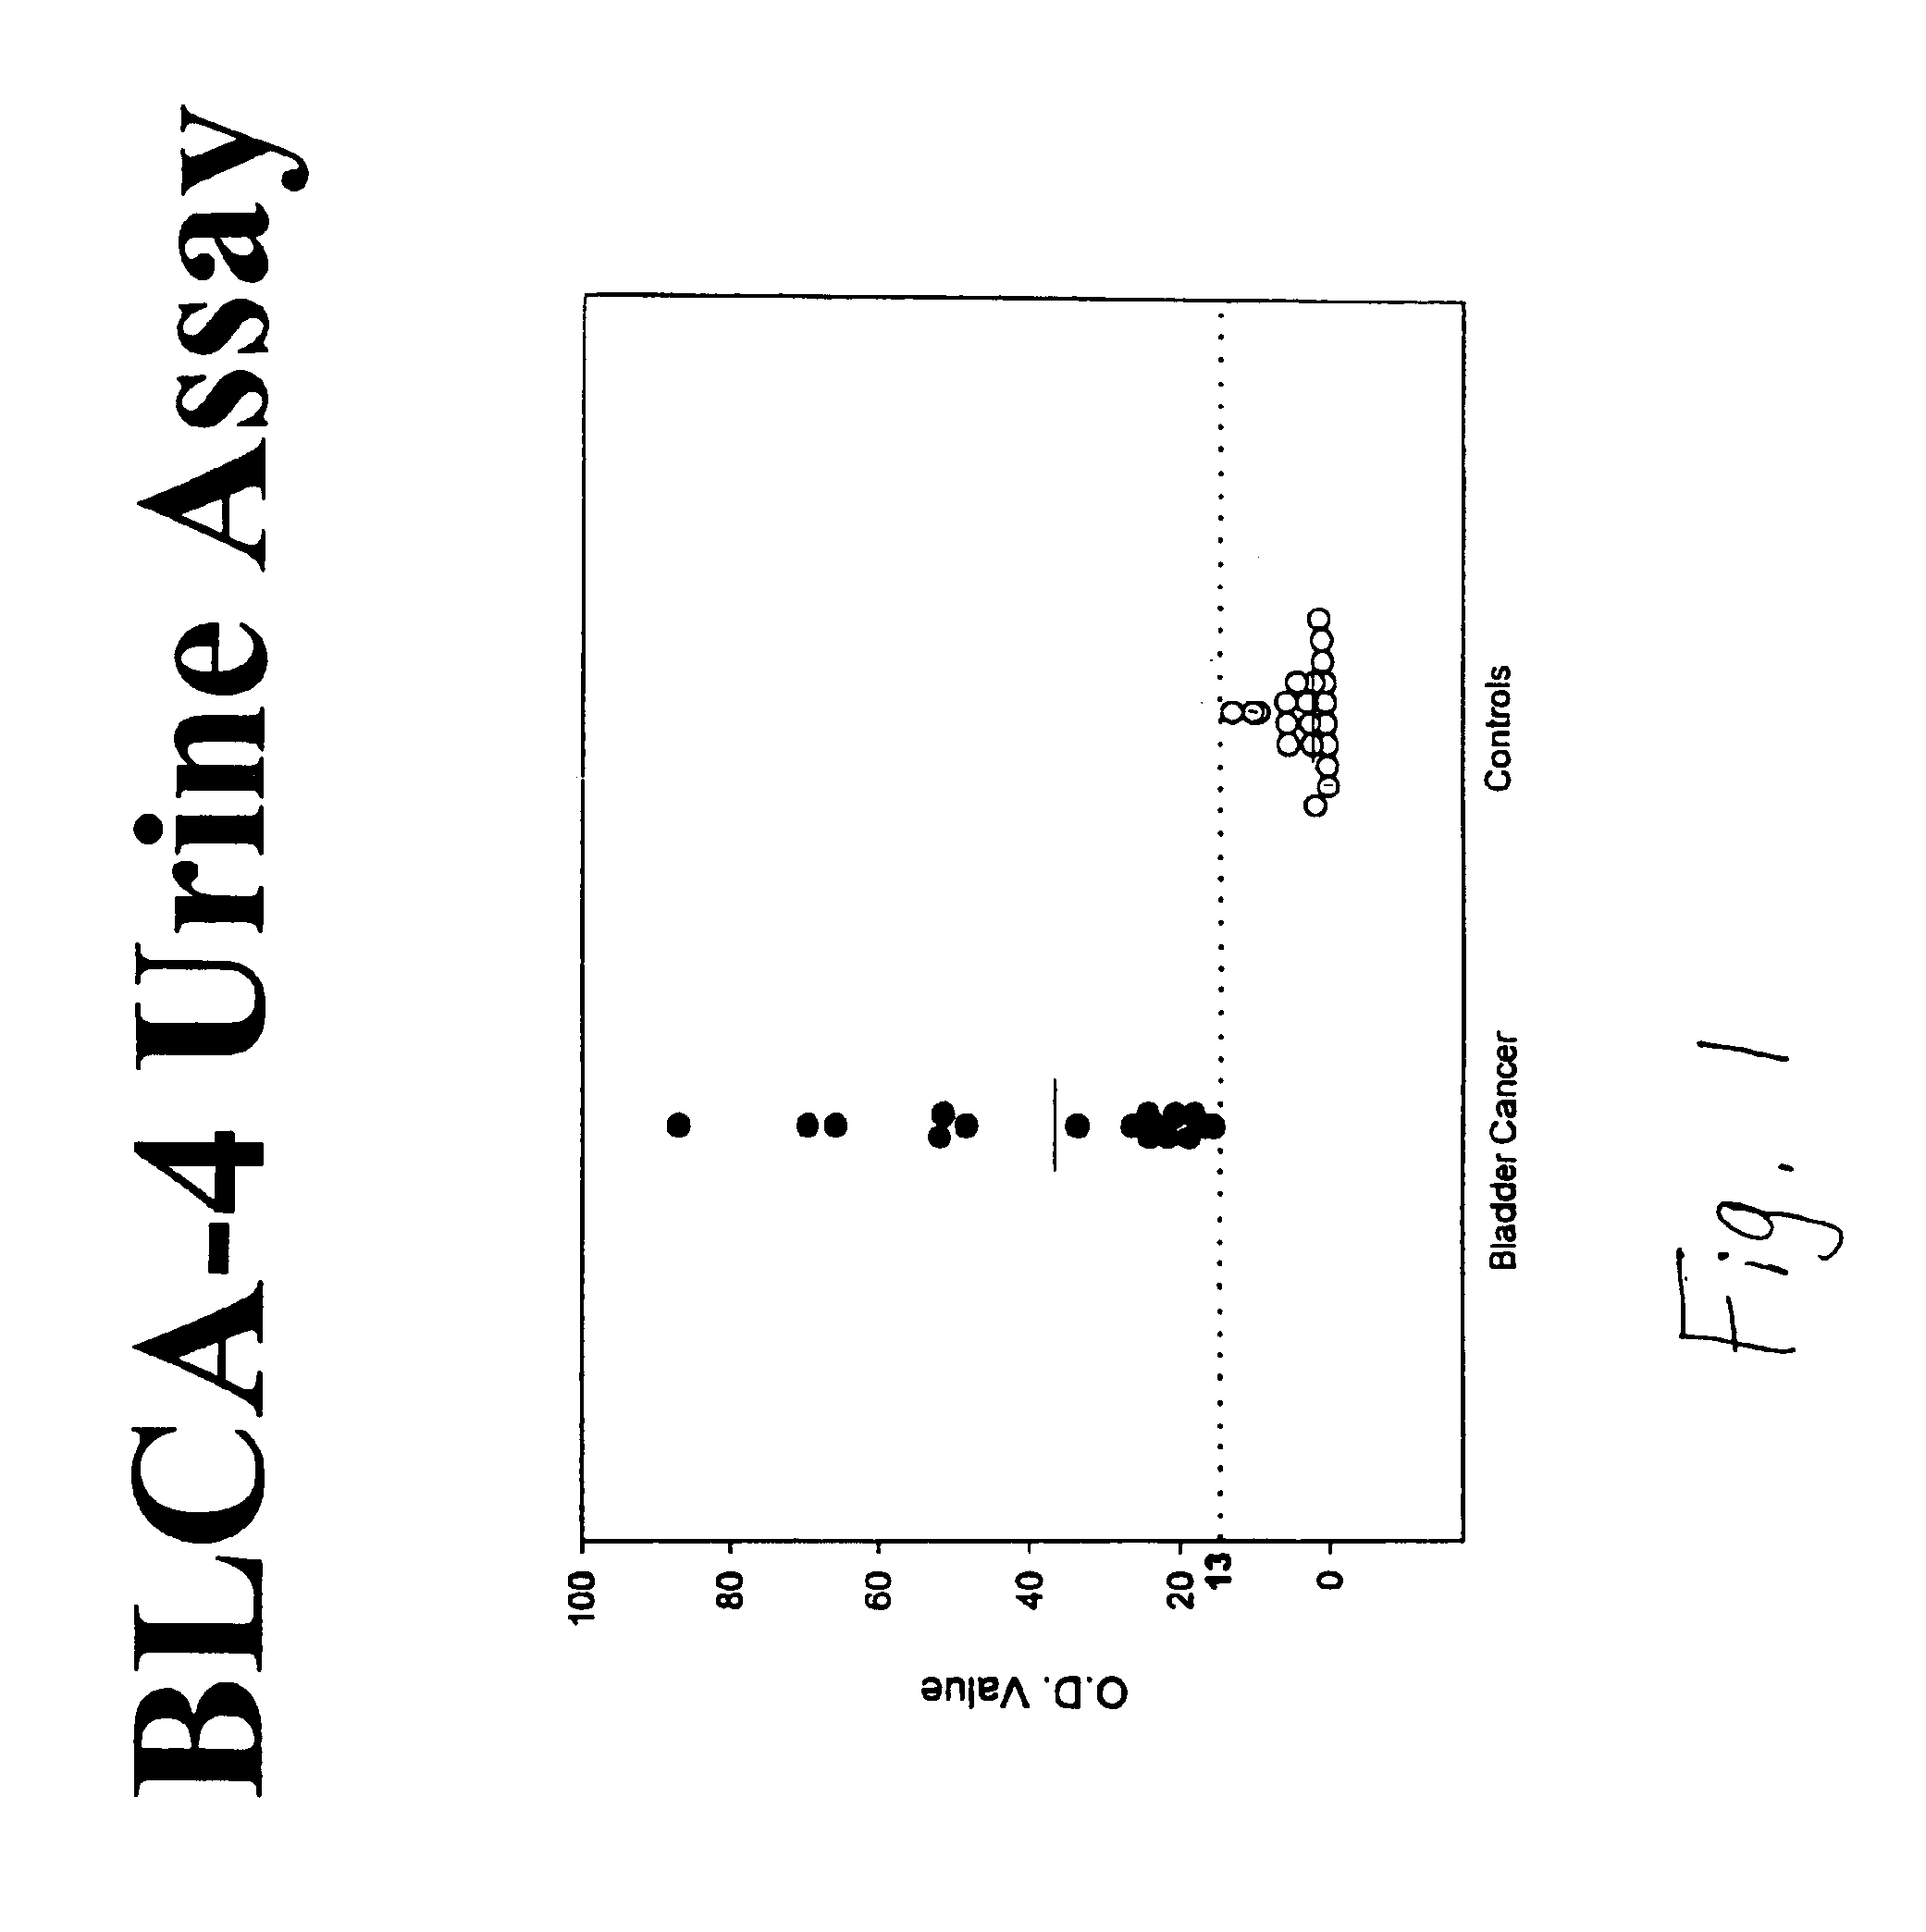 Antibody to bladder cancer nuclear matrix protein and its use